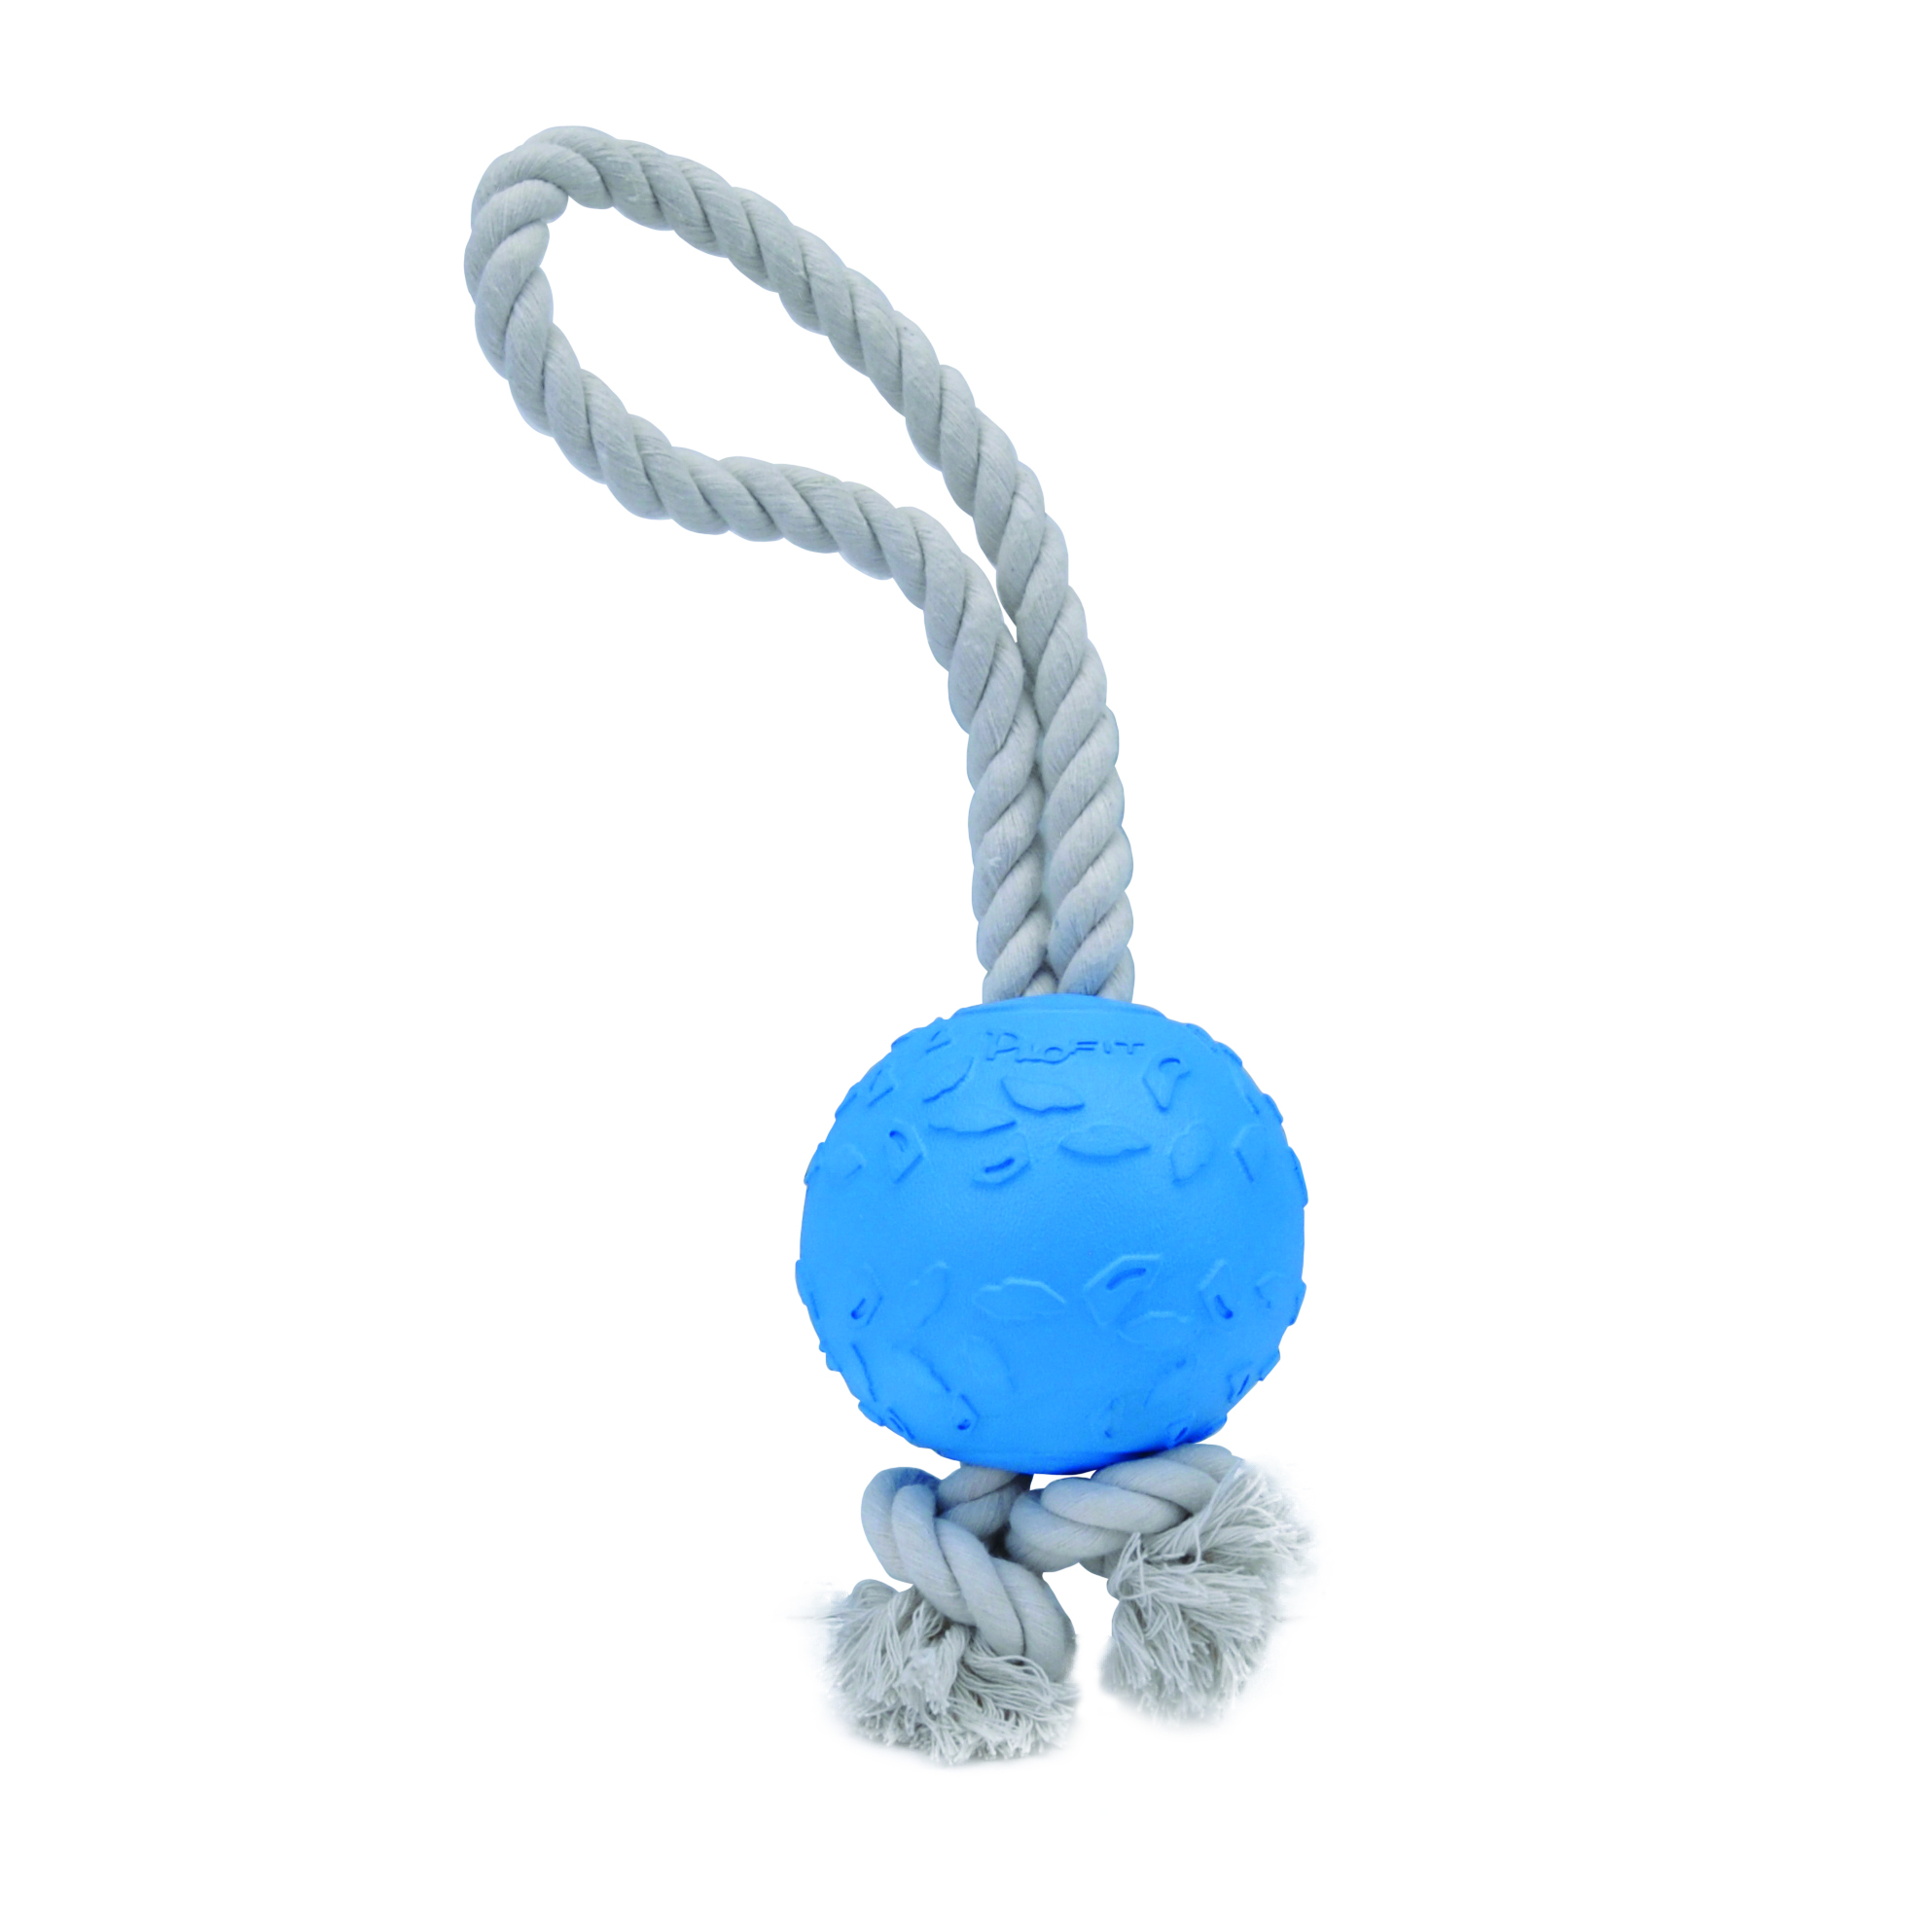 Pro™Fit Foam Toy Rope Ball